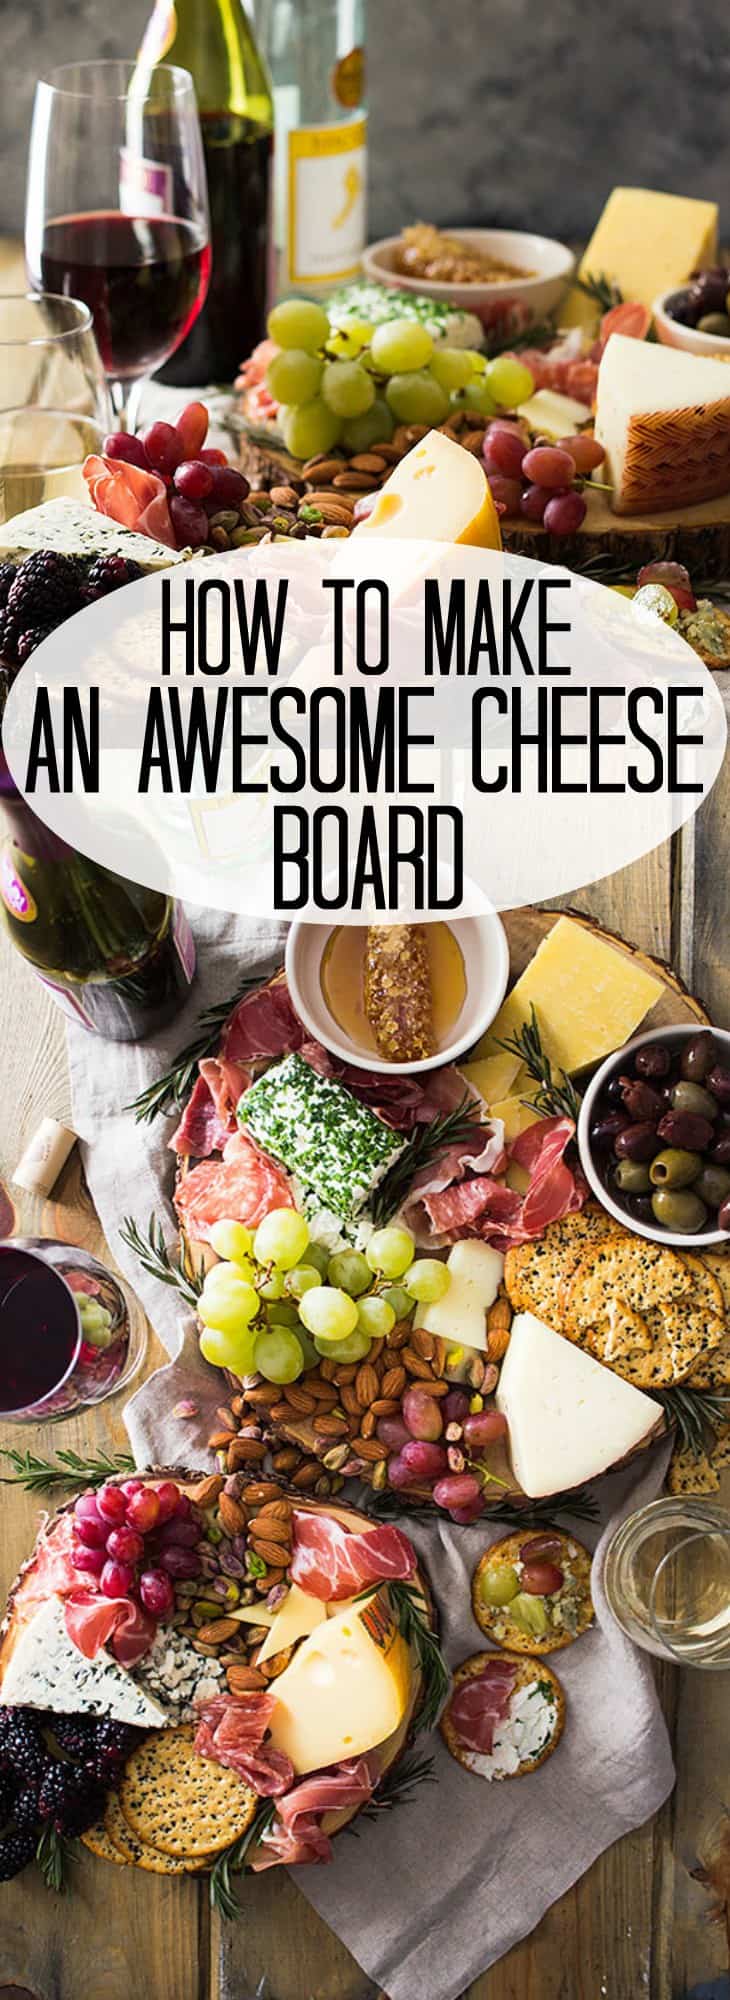 titled image (and shown): how to make an awesome cheese board